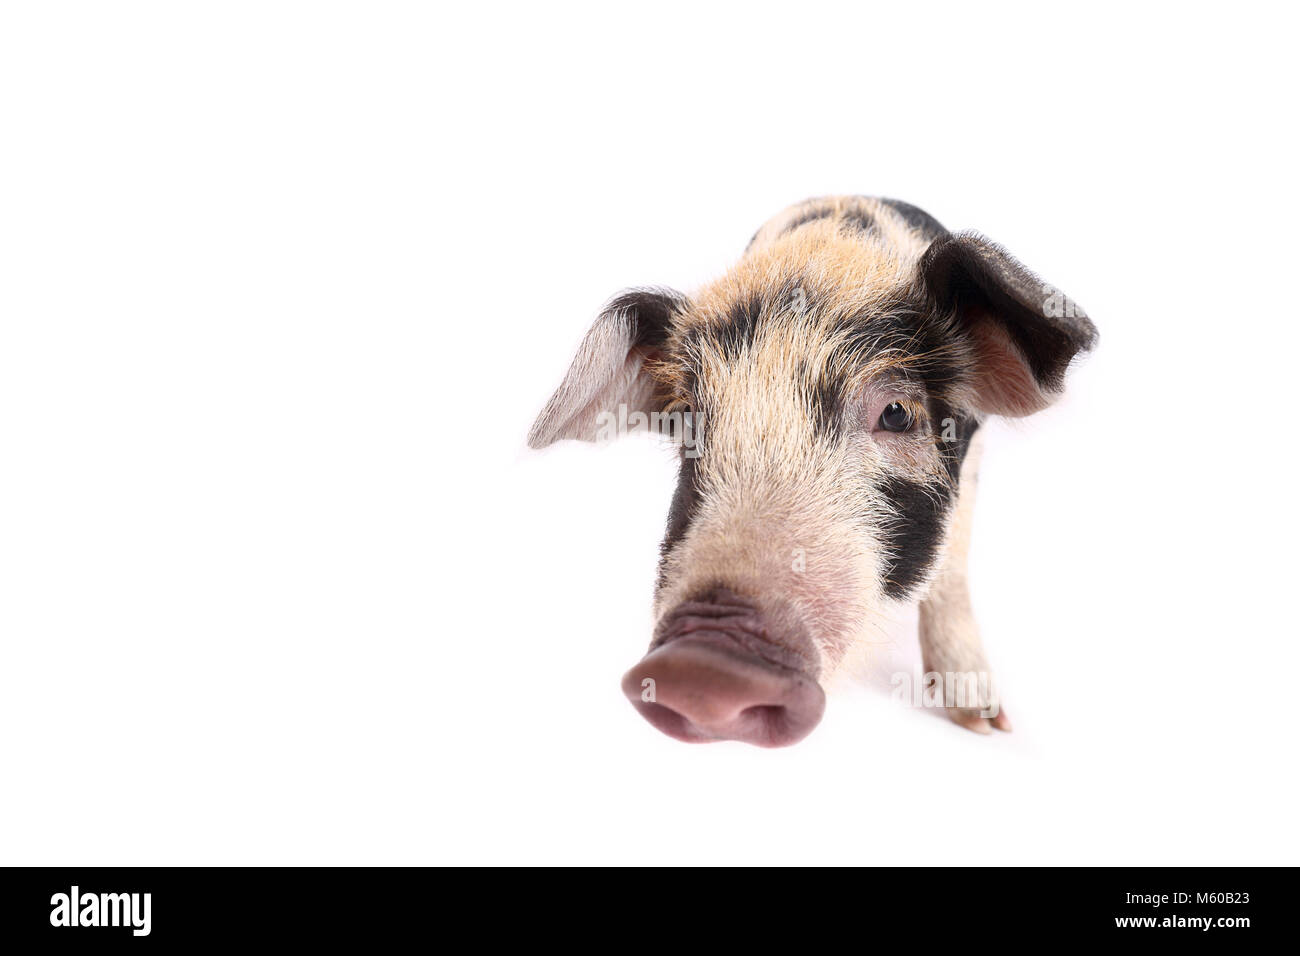 Domestic Pig, Turopolje x ?. Piglet (4 weeks old) standing. Studio picture seen against a white background. Germany Stock Photo